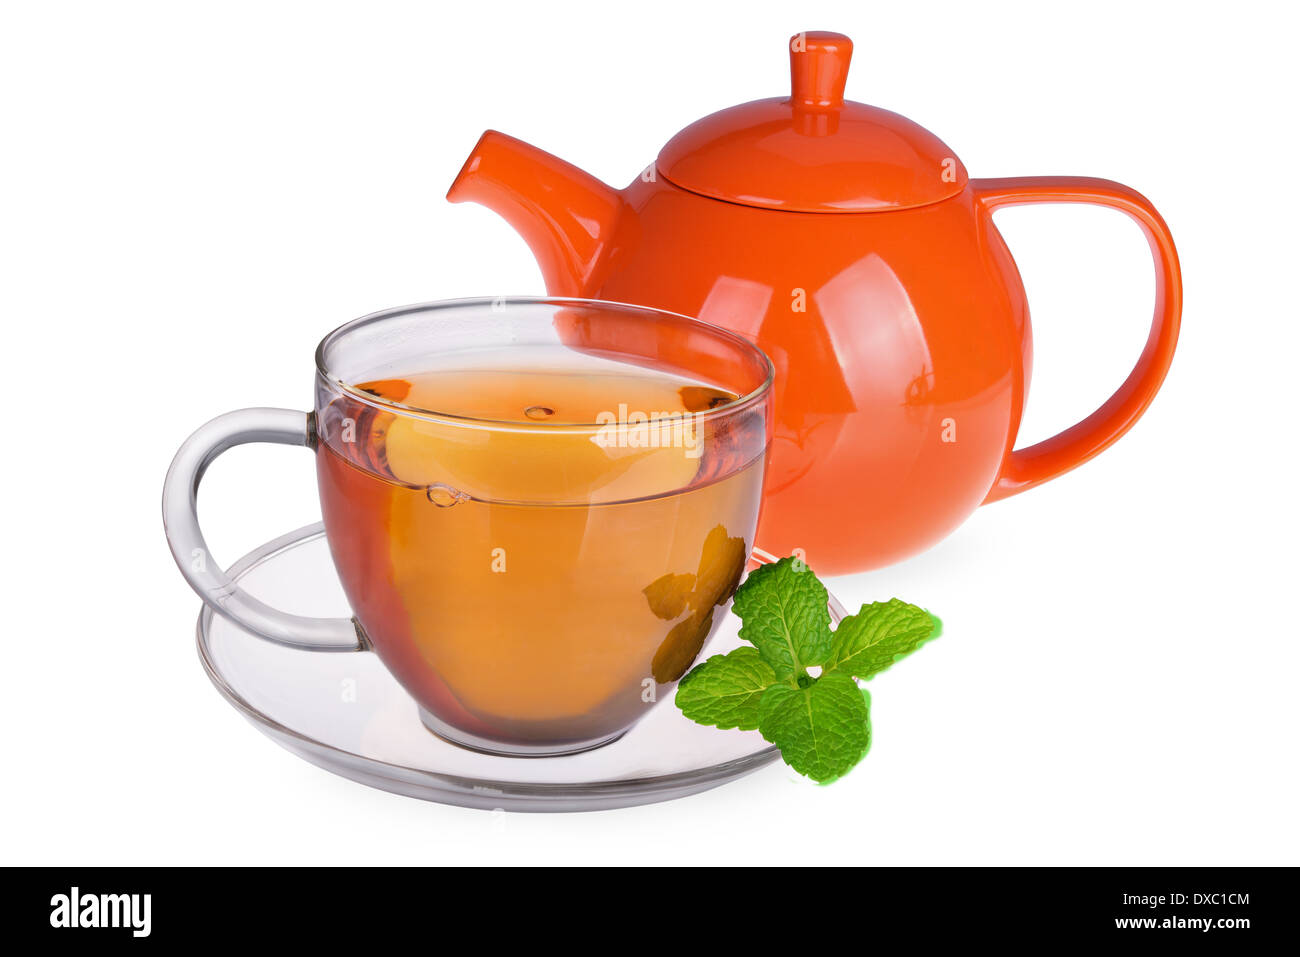 Glass cup of tea with mint leaves and orange teapot isolated on white background Stock Photo